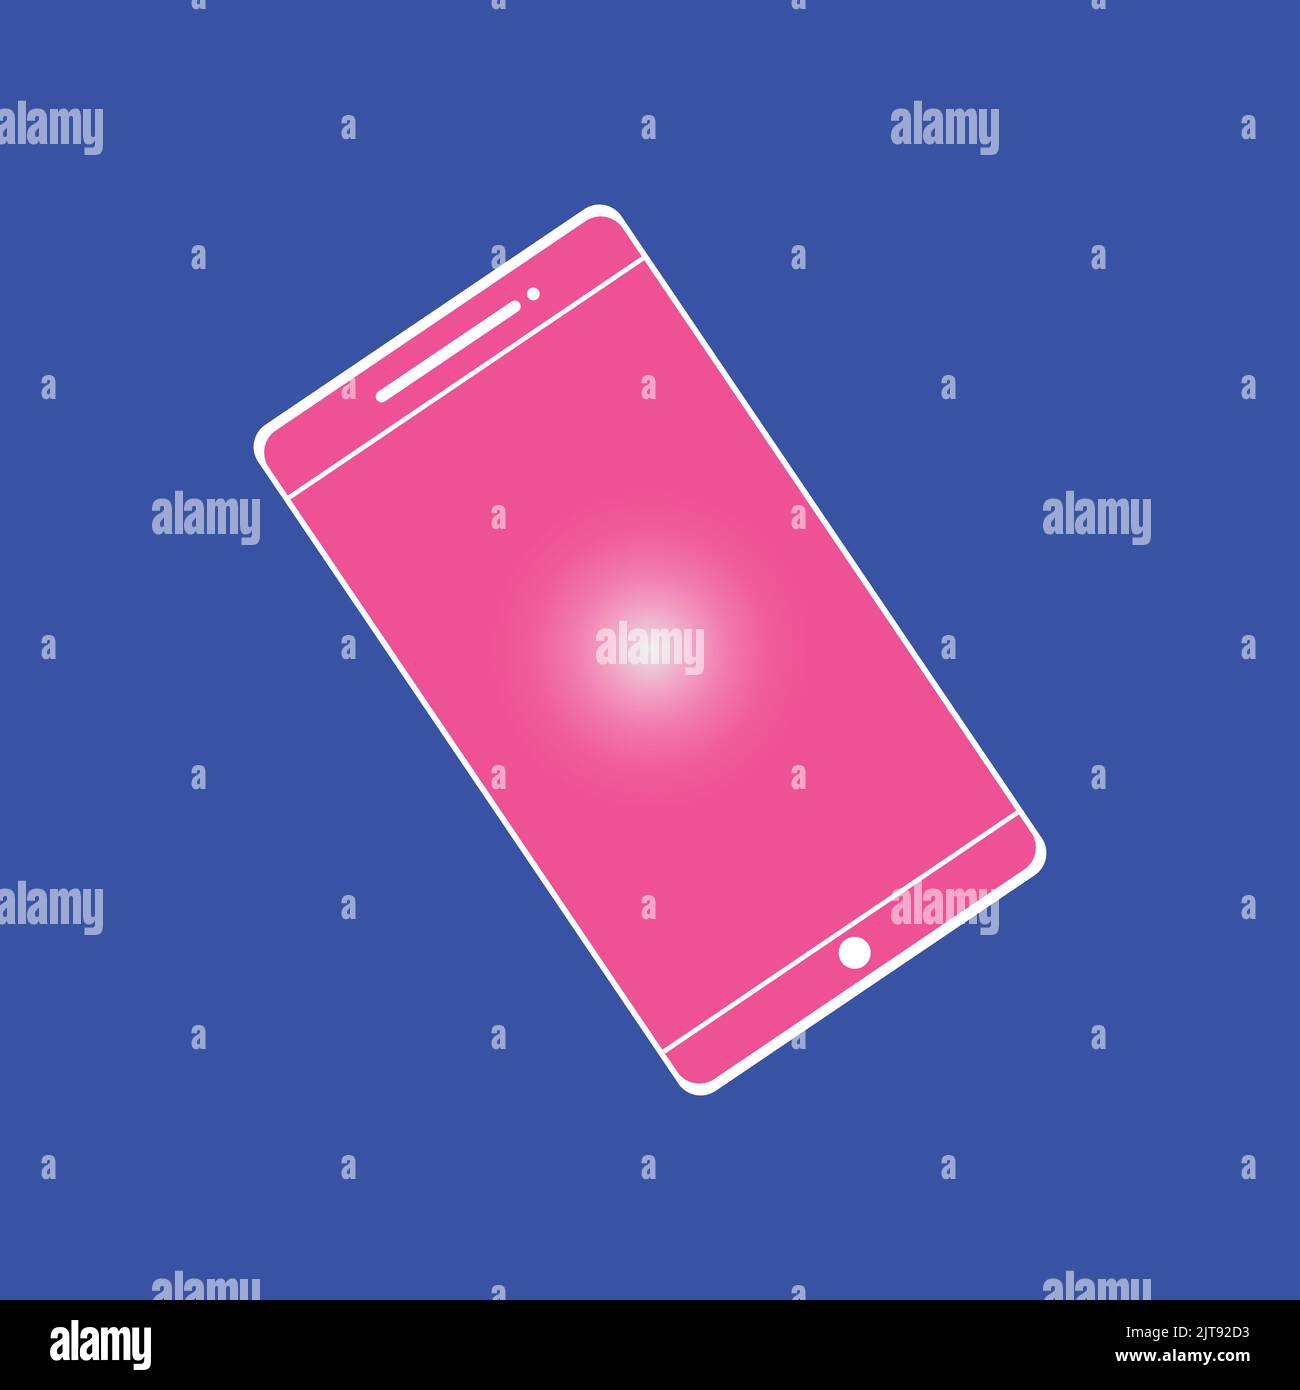 Mobile phone template design technology sticker icon Stock Vector